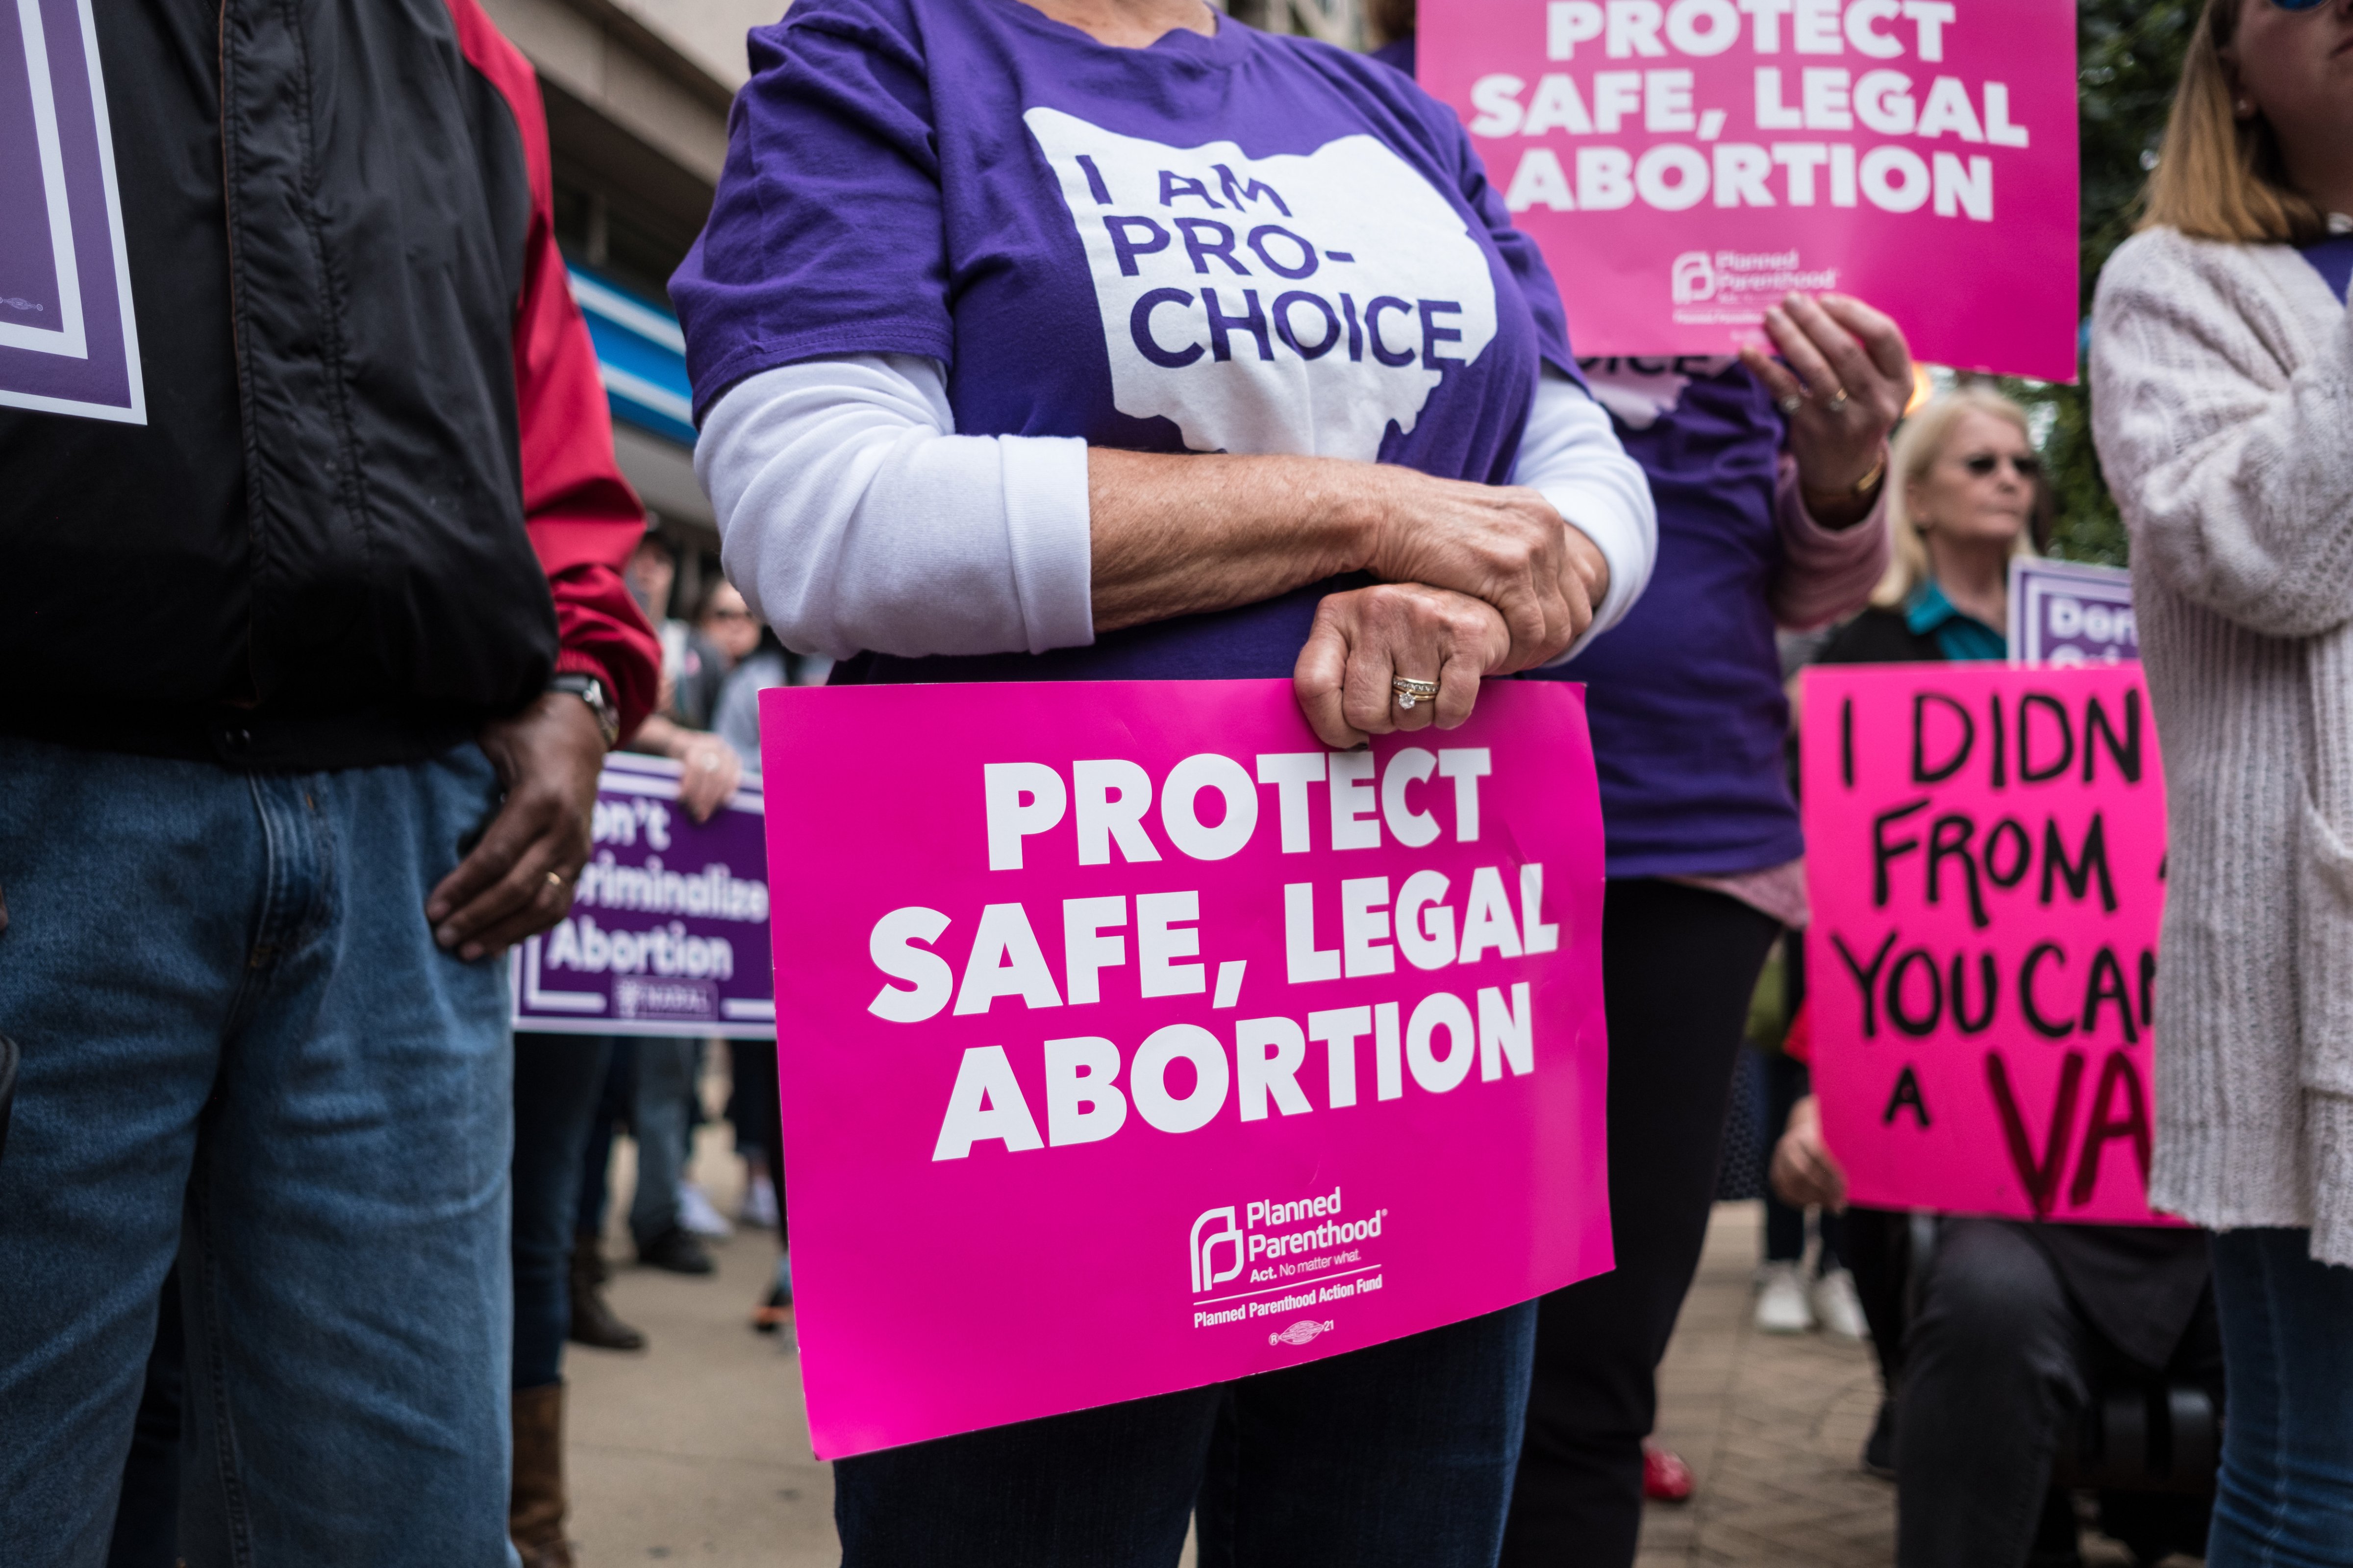 An activist holds a sign during an abortion rights protest in Dayton, Ohio on May 19, 2019. (Megan Jelinger—SOPA Images/Getty Images)